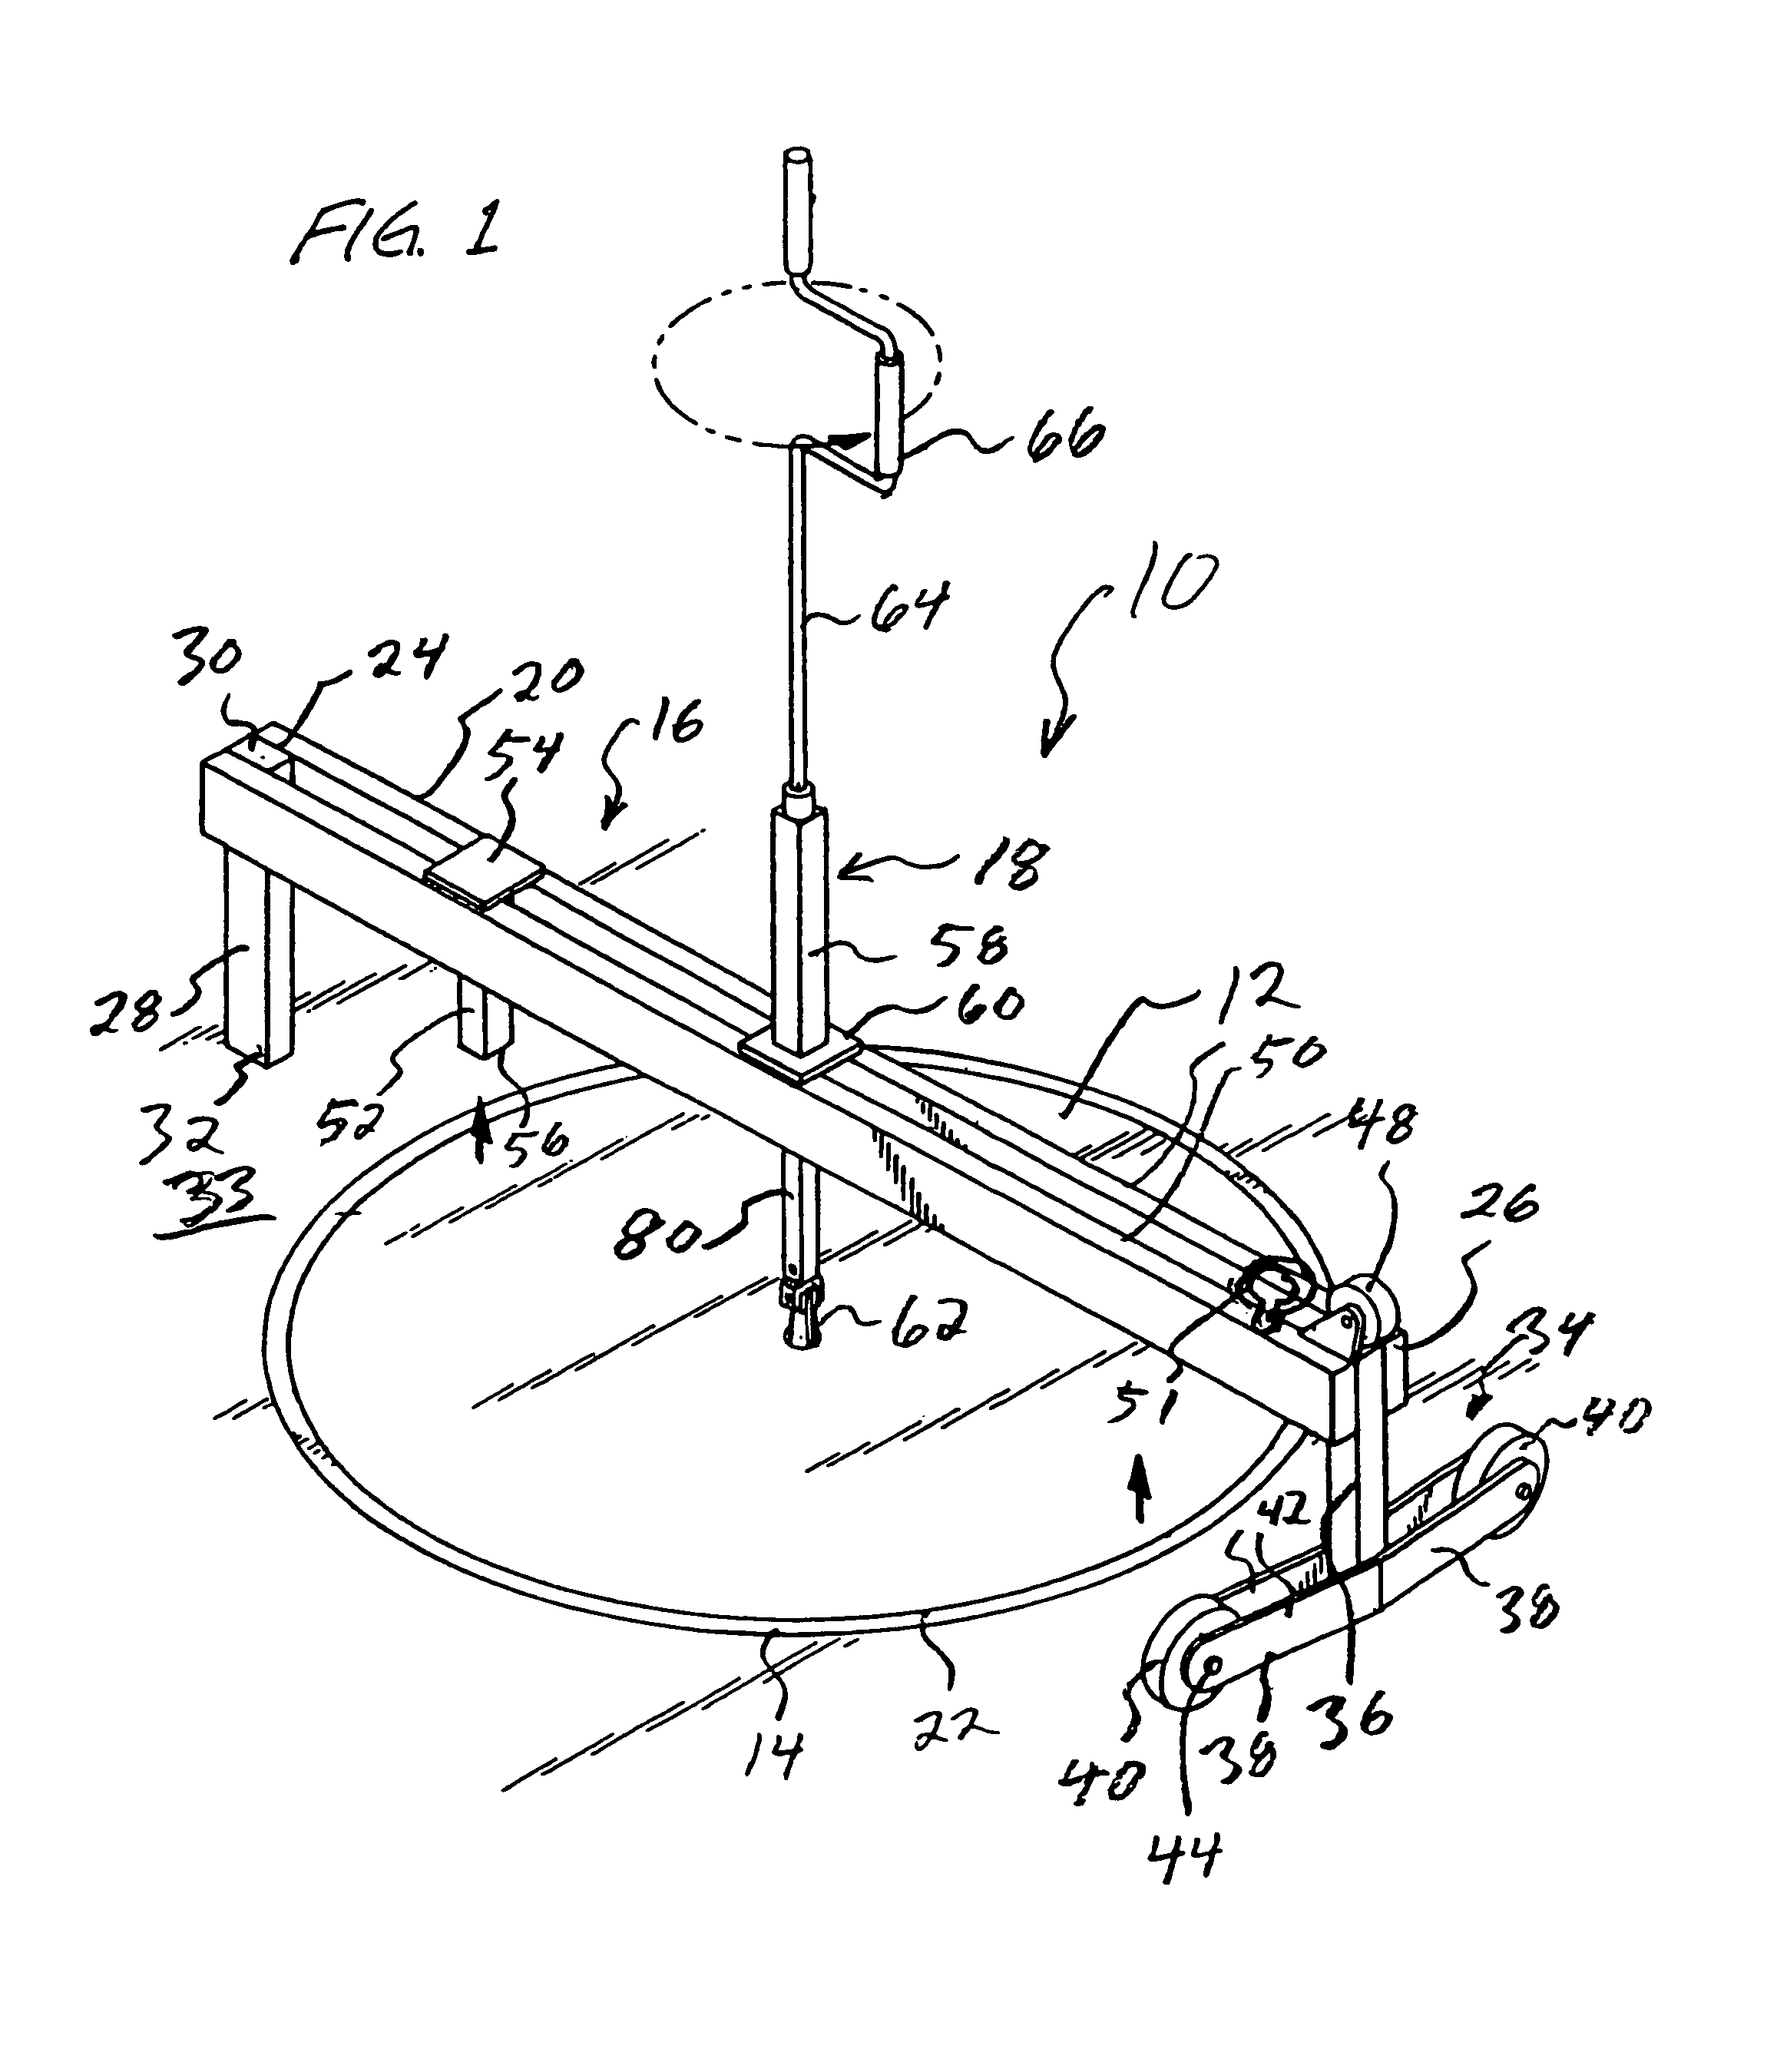 Manhole cover lifting apparatus and method